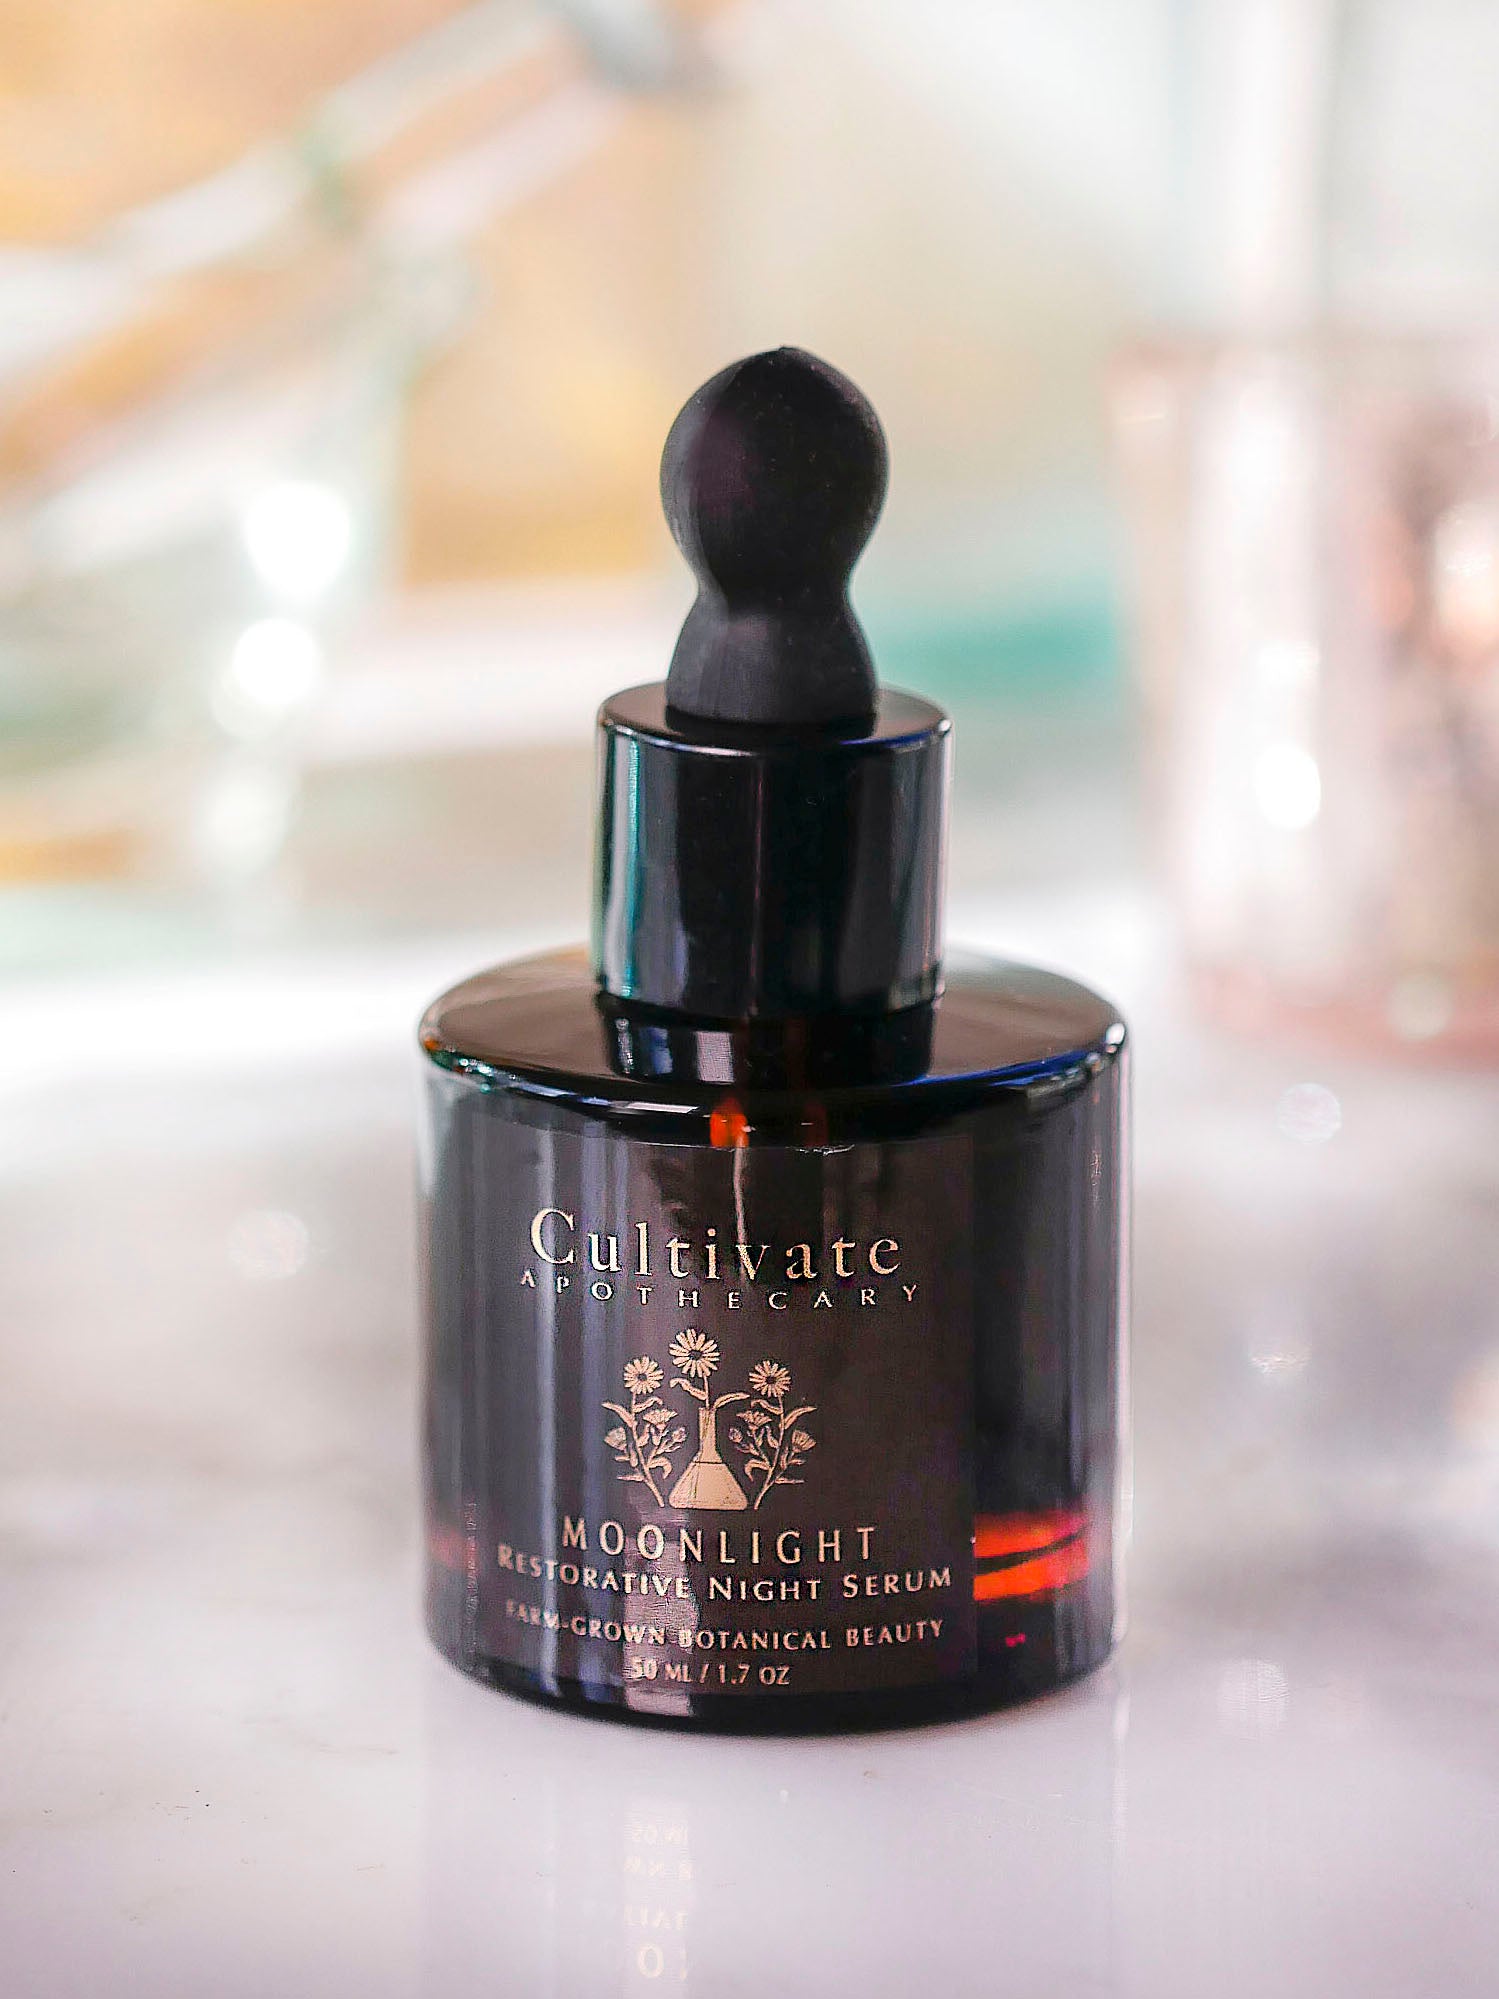 Night serum from the skincare set for combination skin by Cultivate Apothecary.